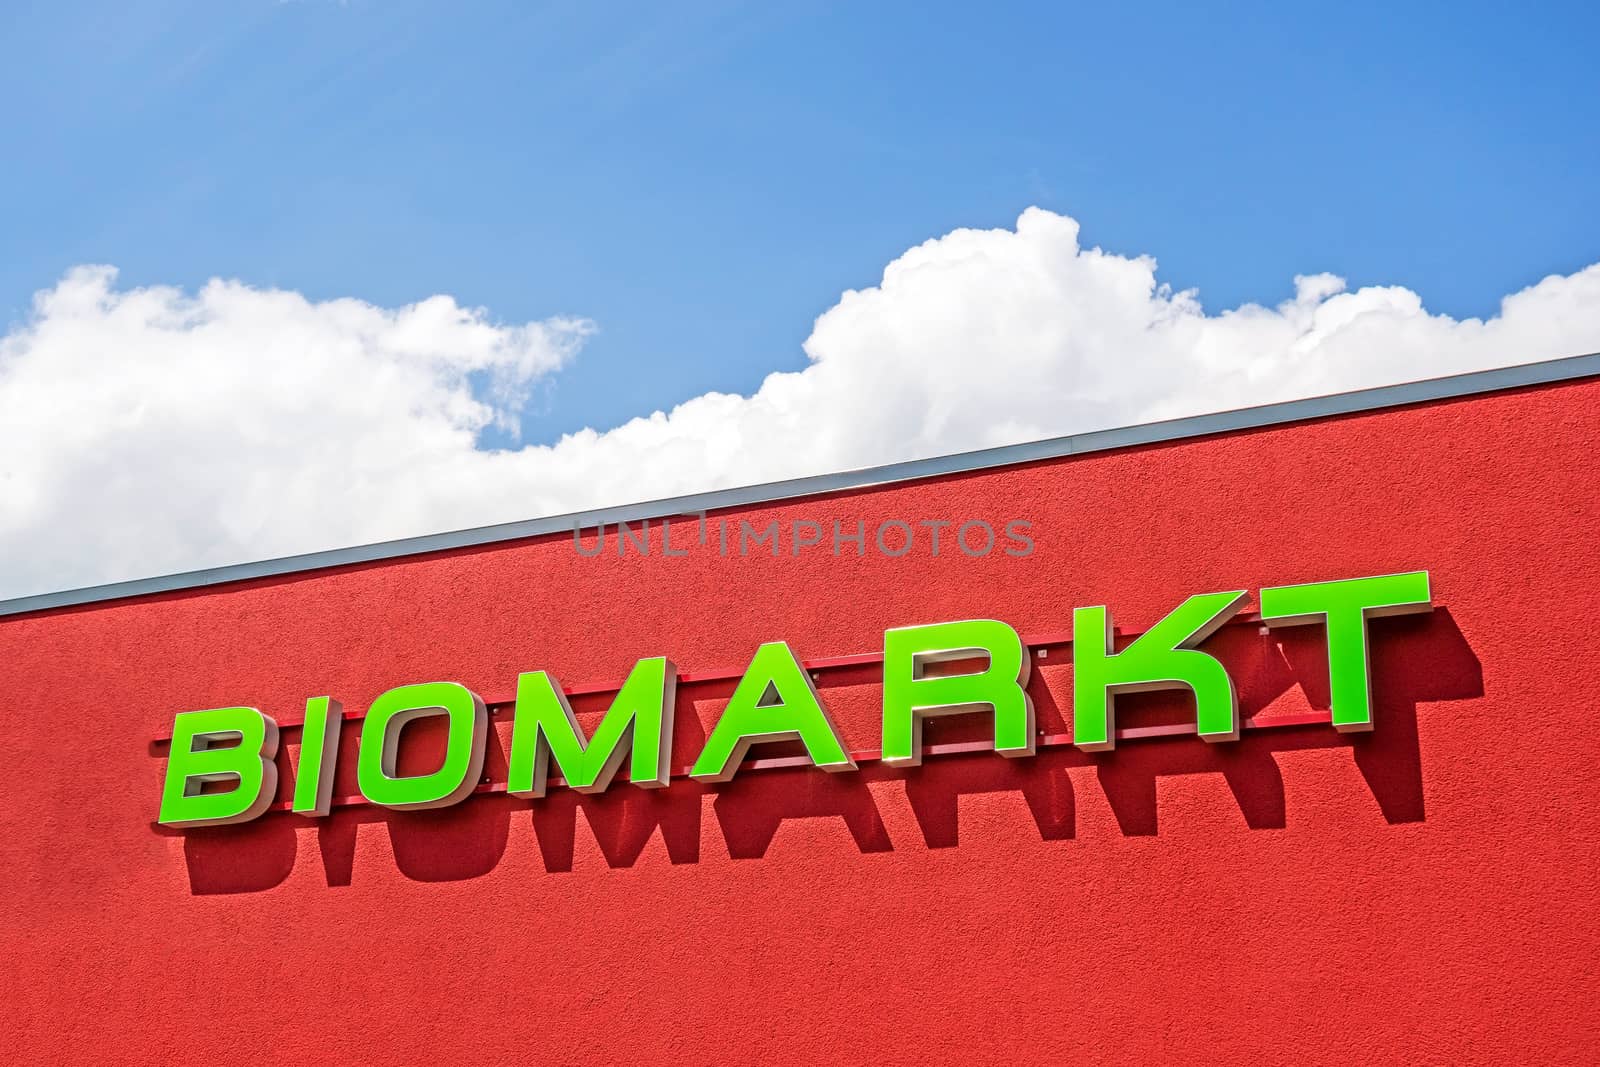 Bio market red facade labeled with "BIOMARKT", german language, blue sky with clouds